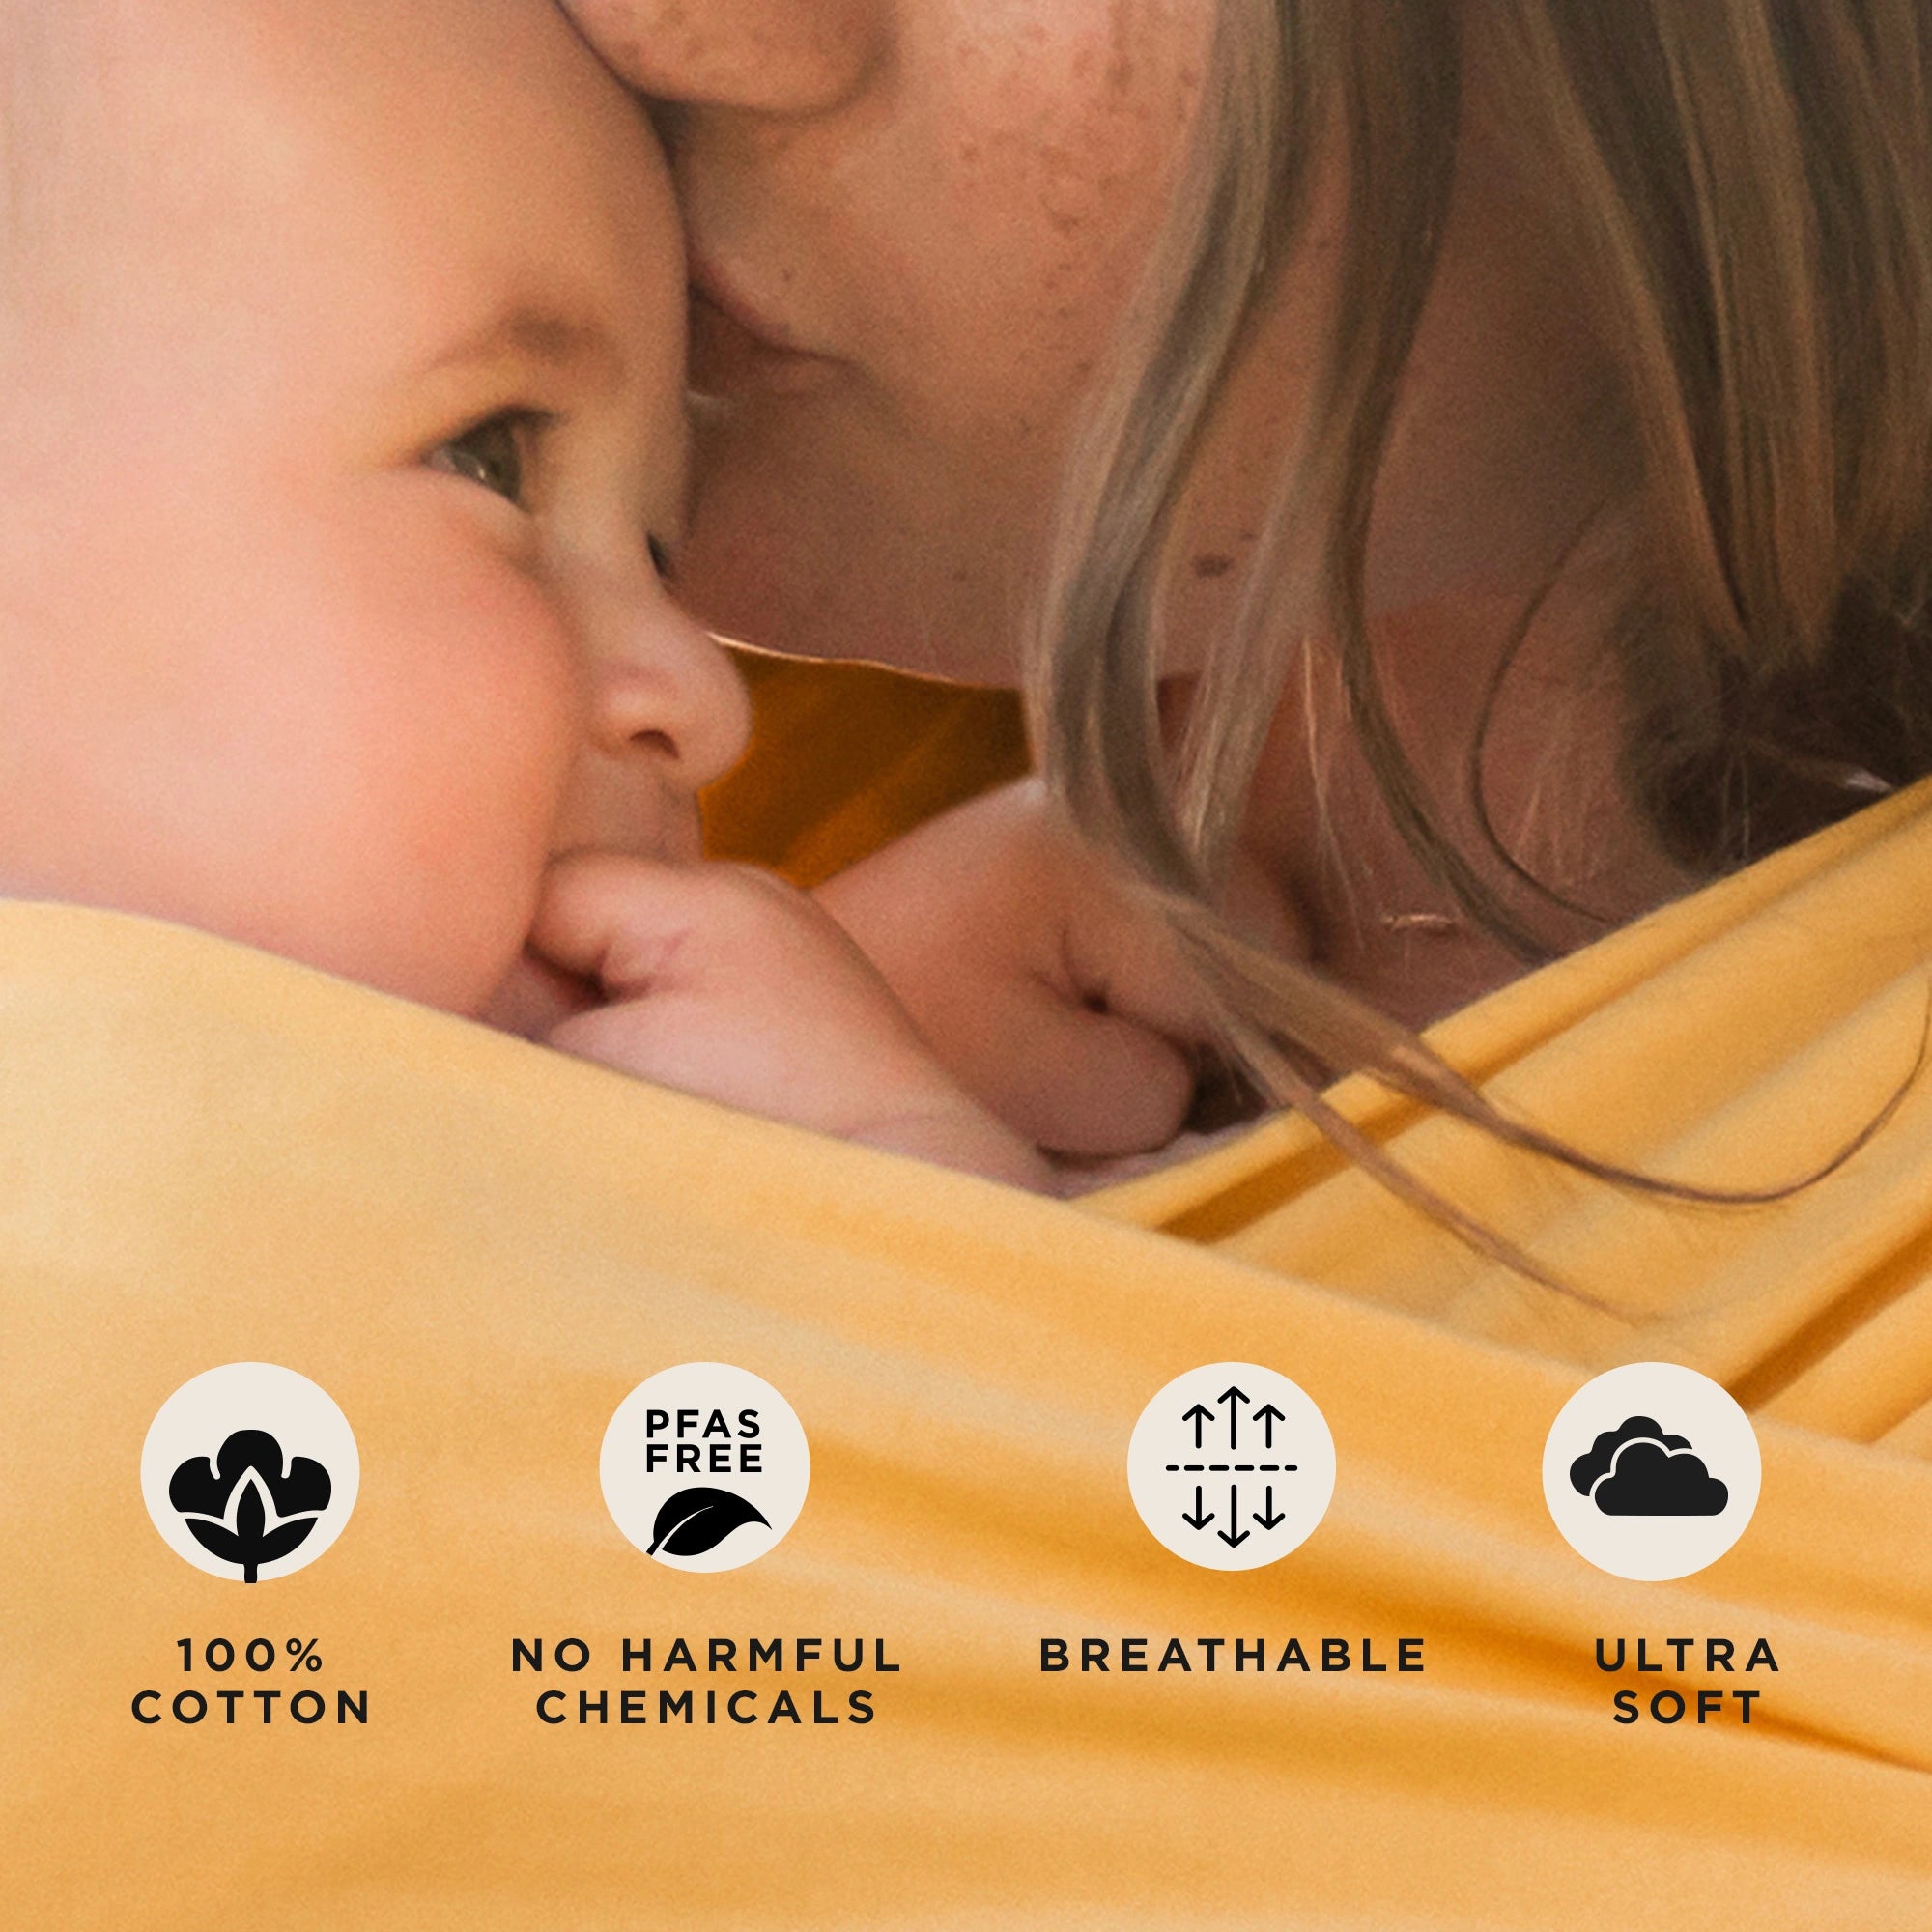 moby wrap features 100% cotton, no harmful chemicals, pfas free, breathable, ultra soft